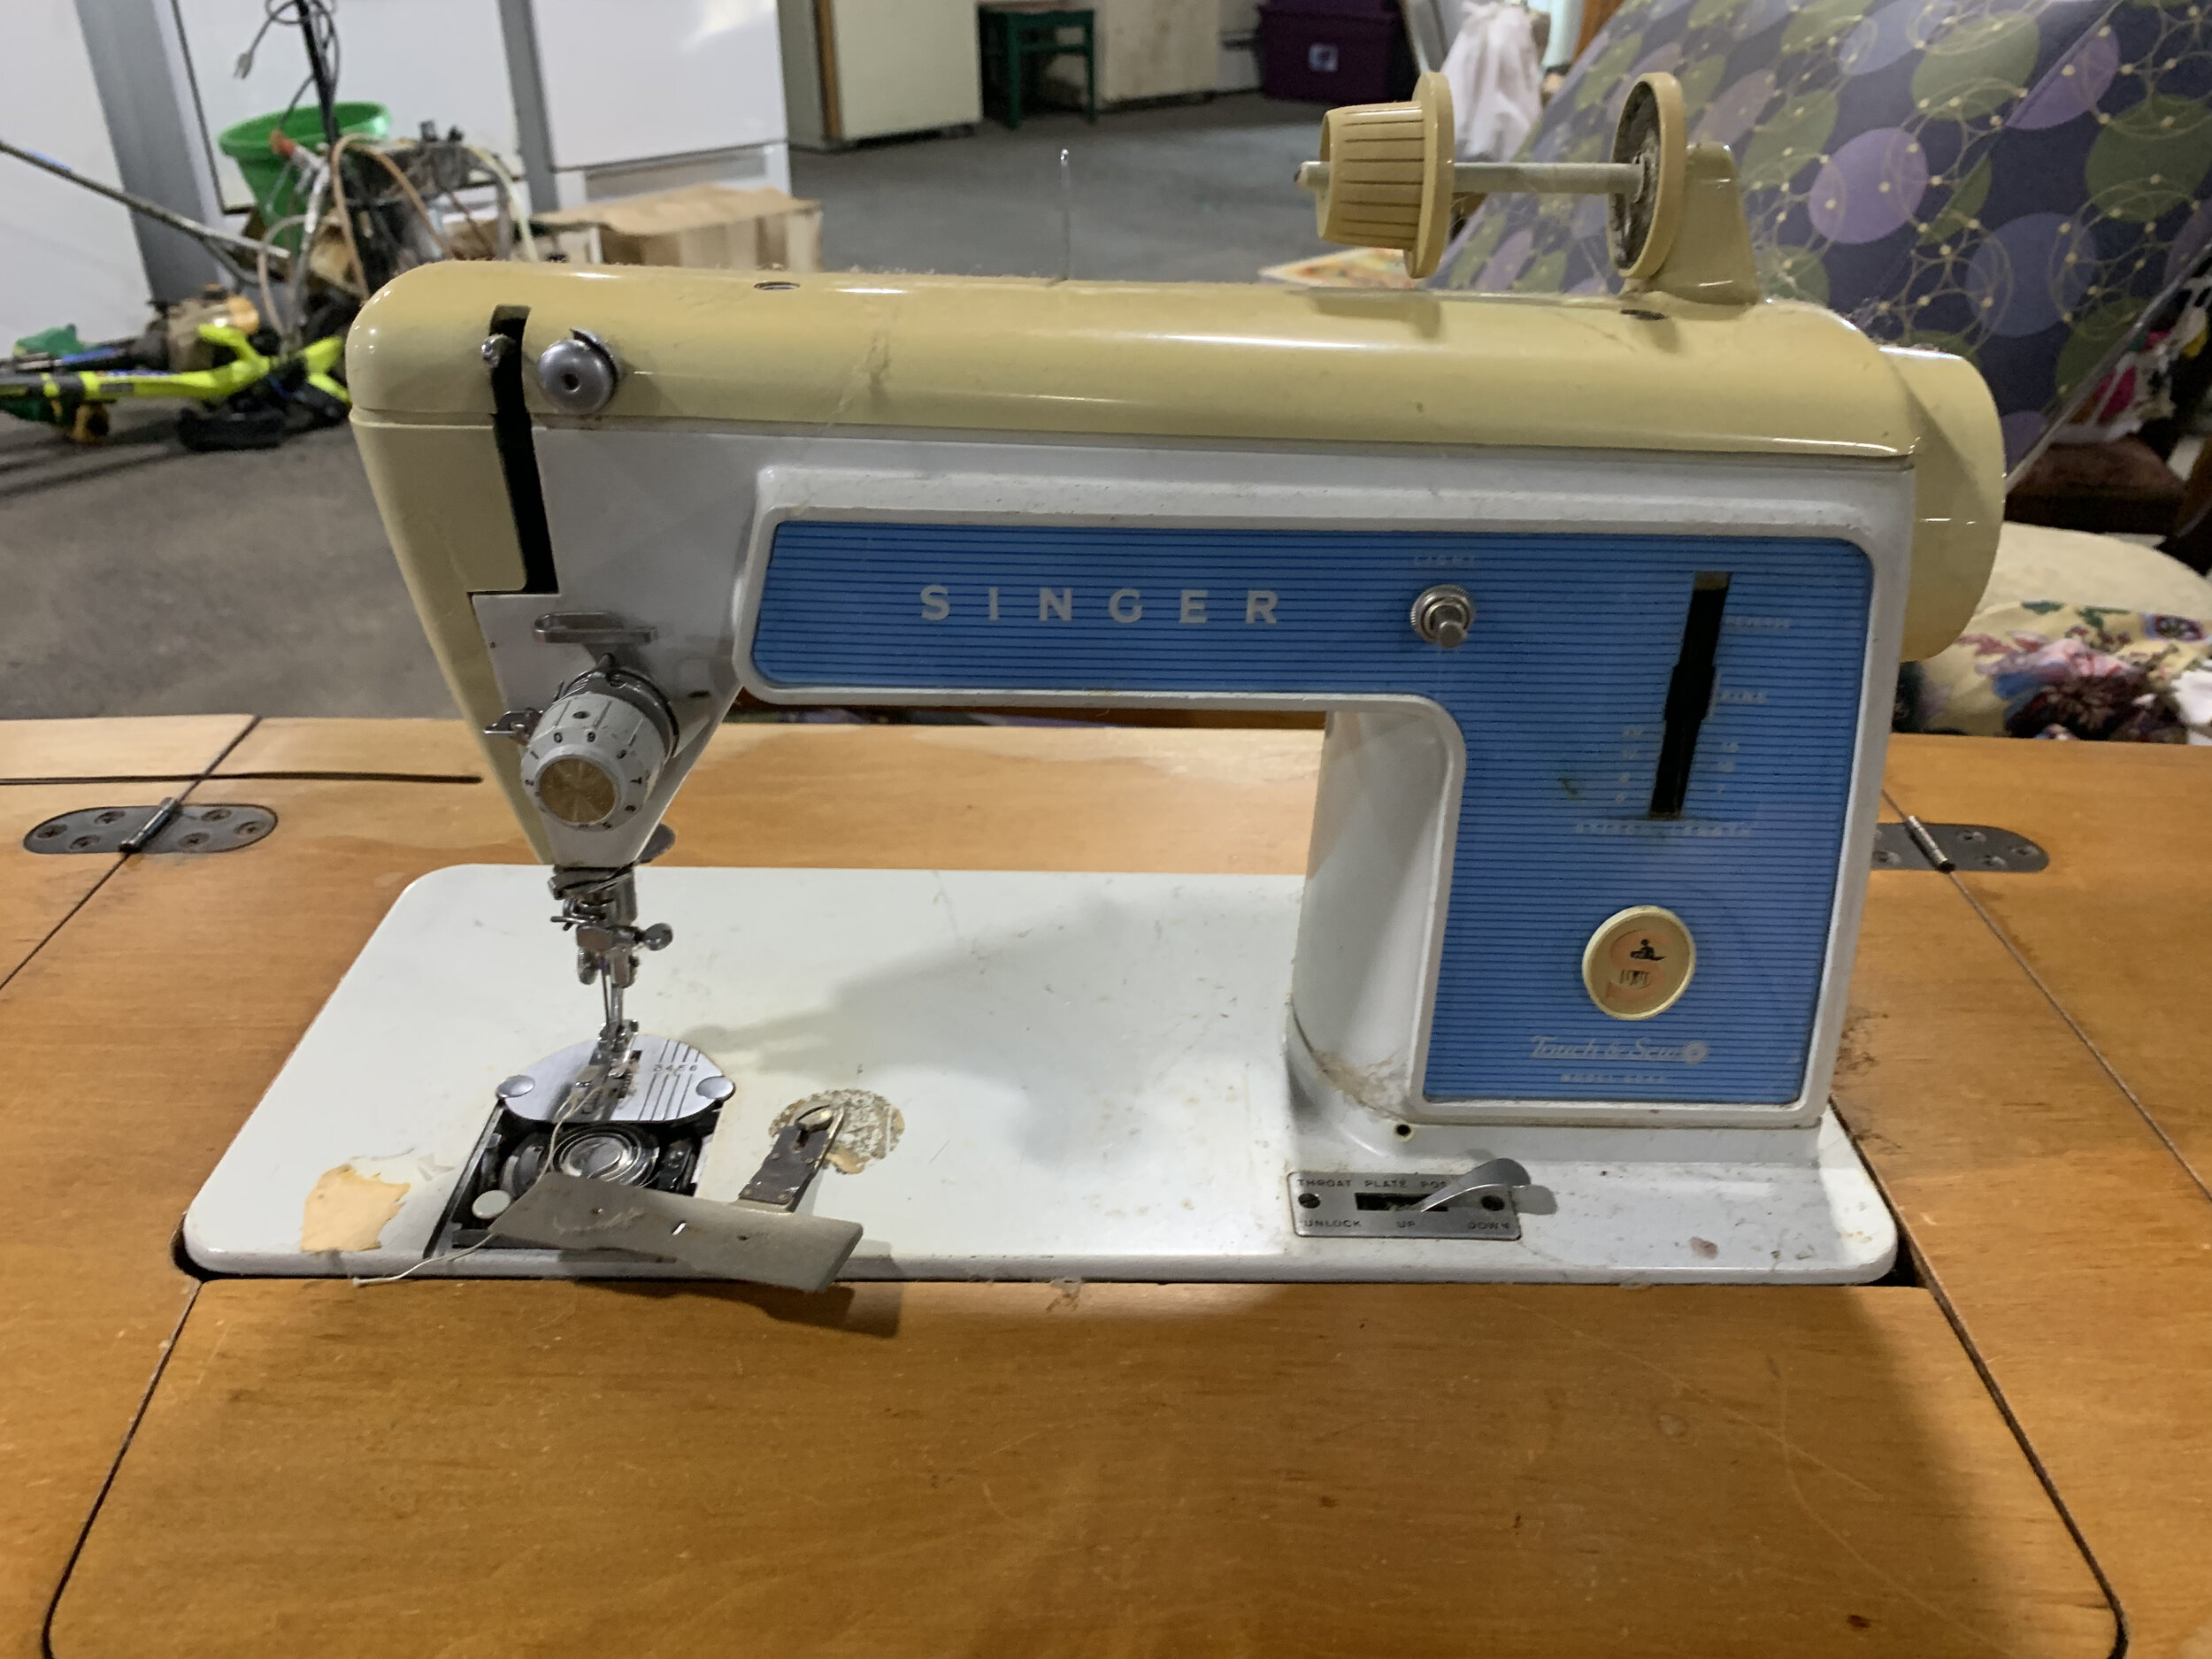 Sold at Auction: Singer Touch & Sew Machine w/ Fruitwood Table